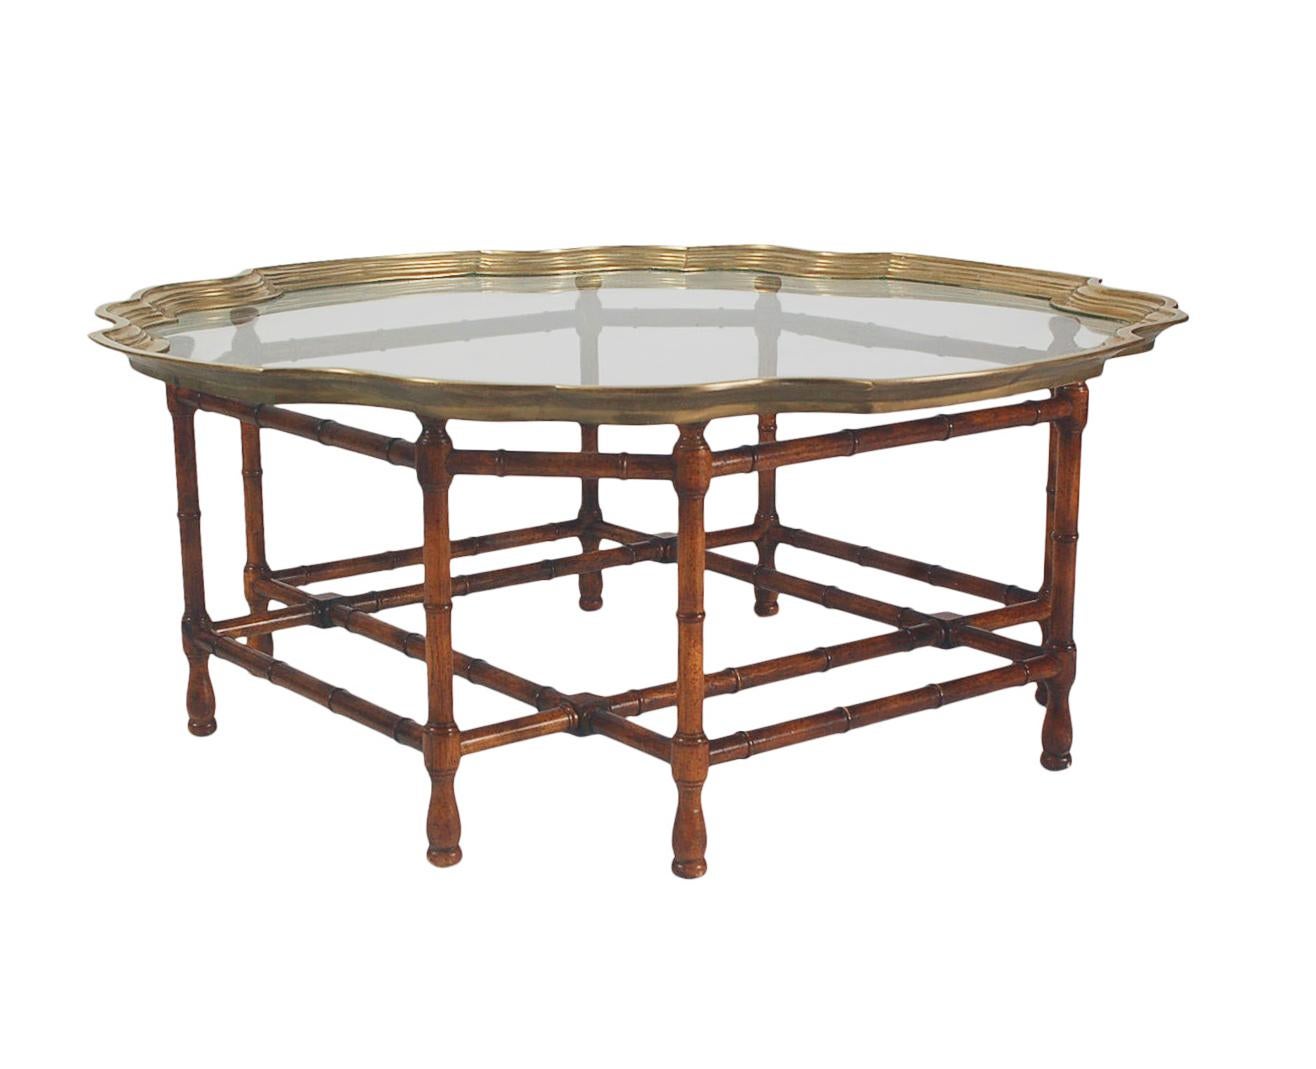 American Hollywood Regency Faux Bamboo & Brass Tray Circular or Round Cocktail